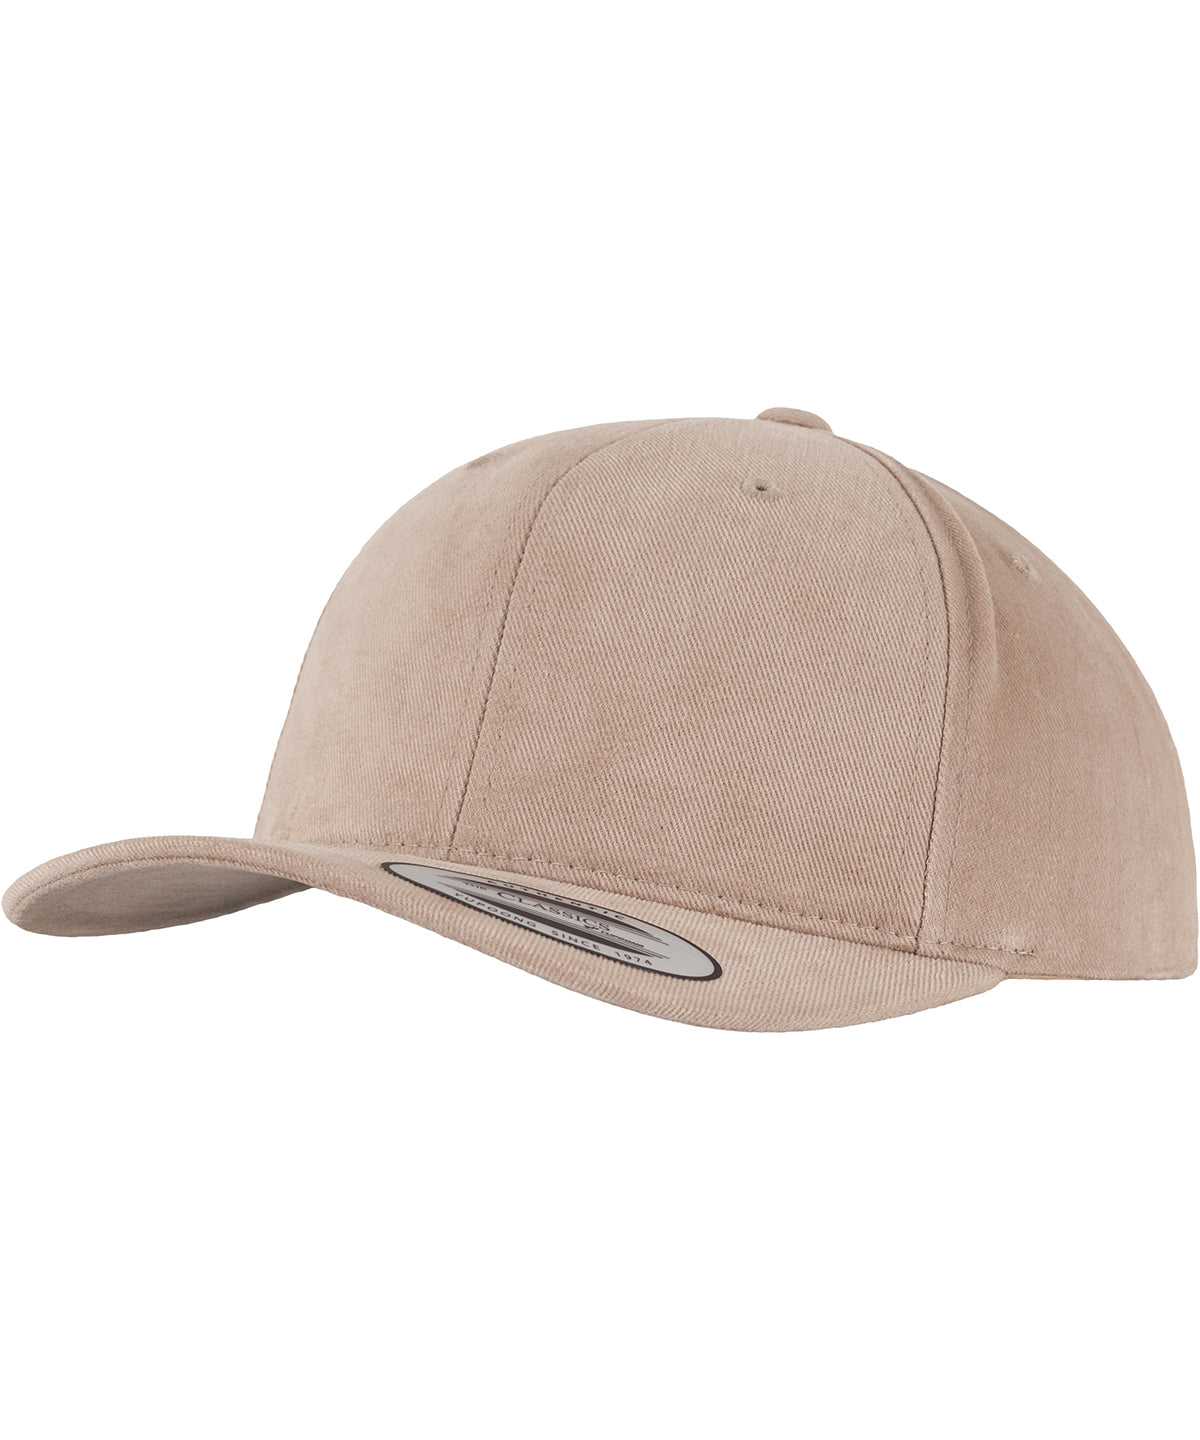 Flexfit by Yupoong Brushed cotton twill mid-profile